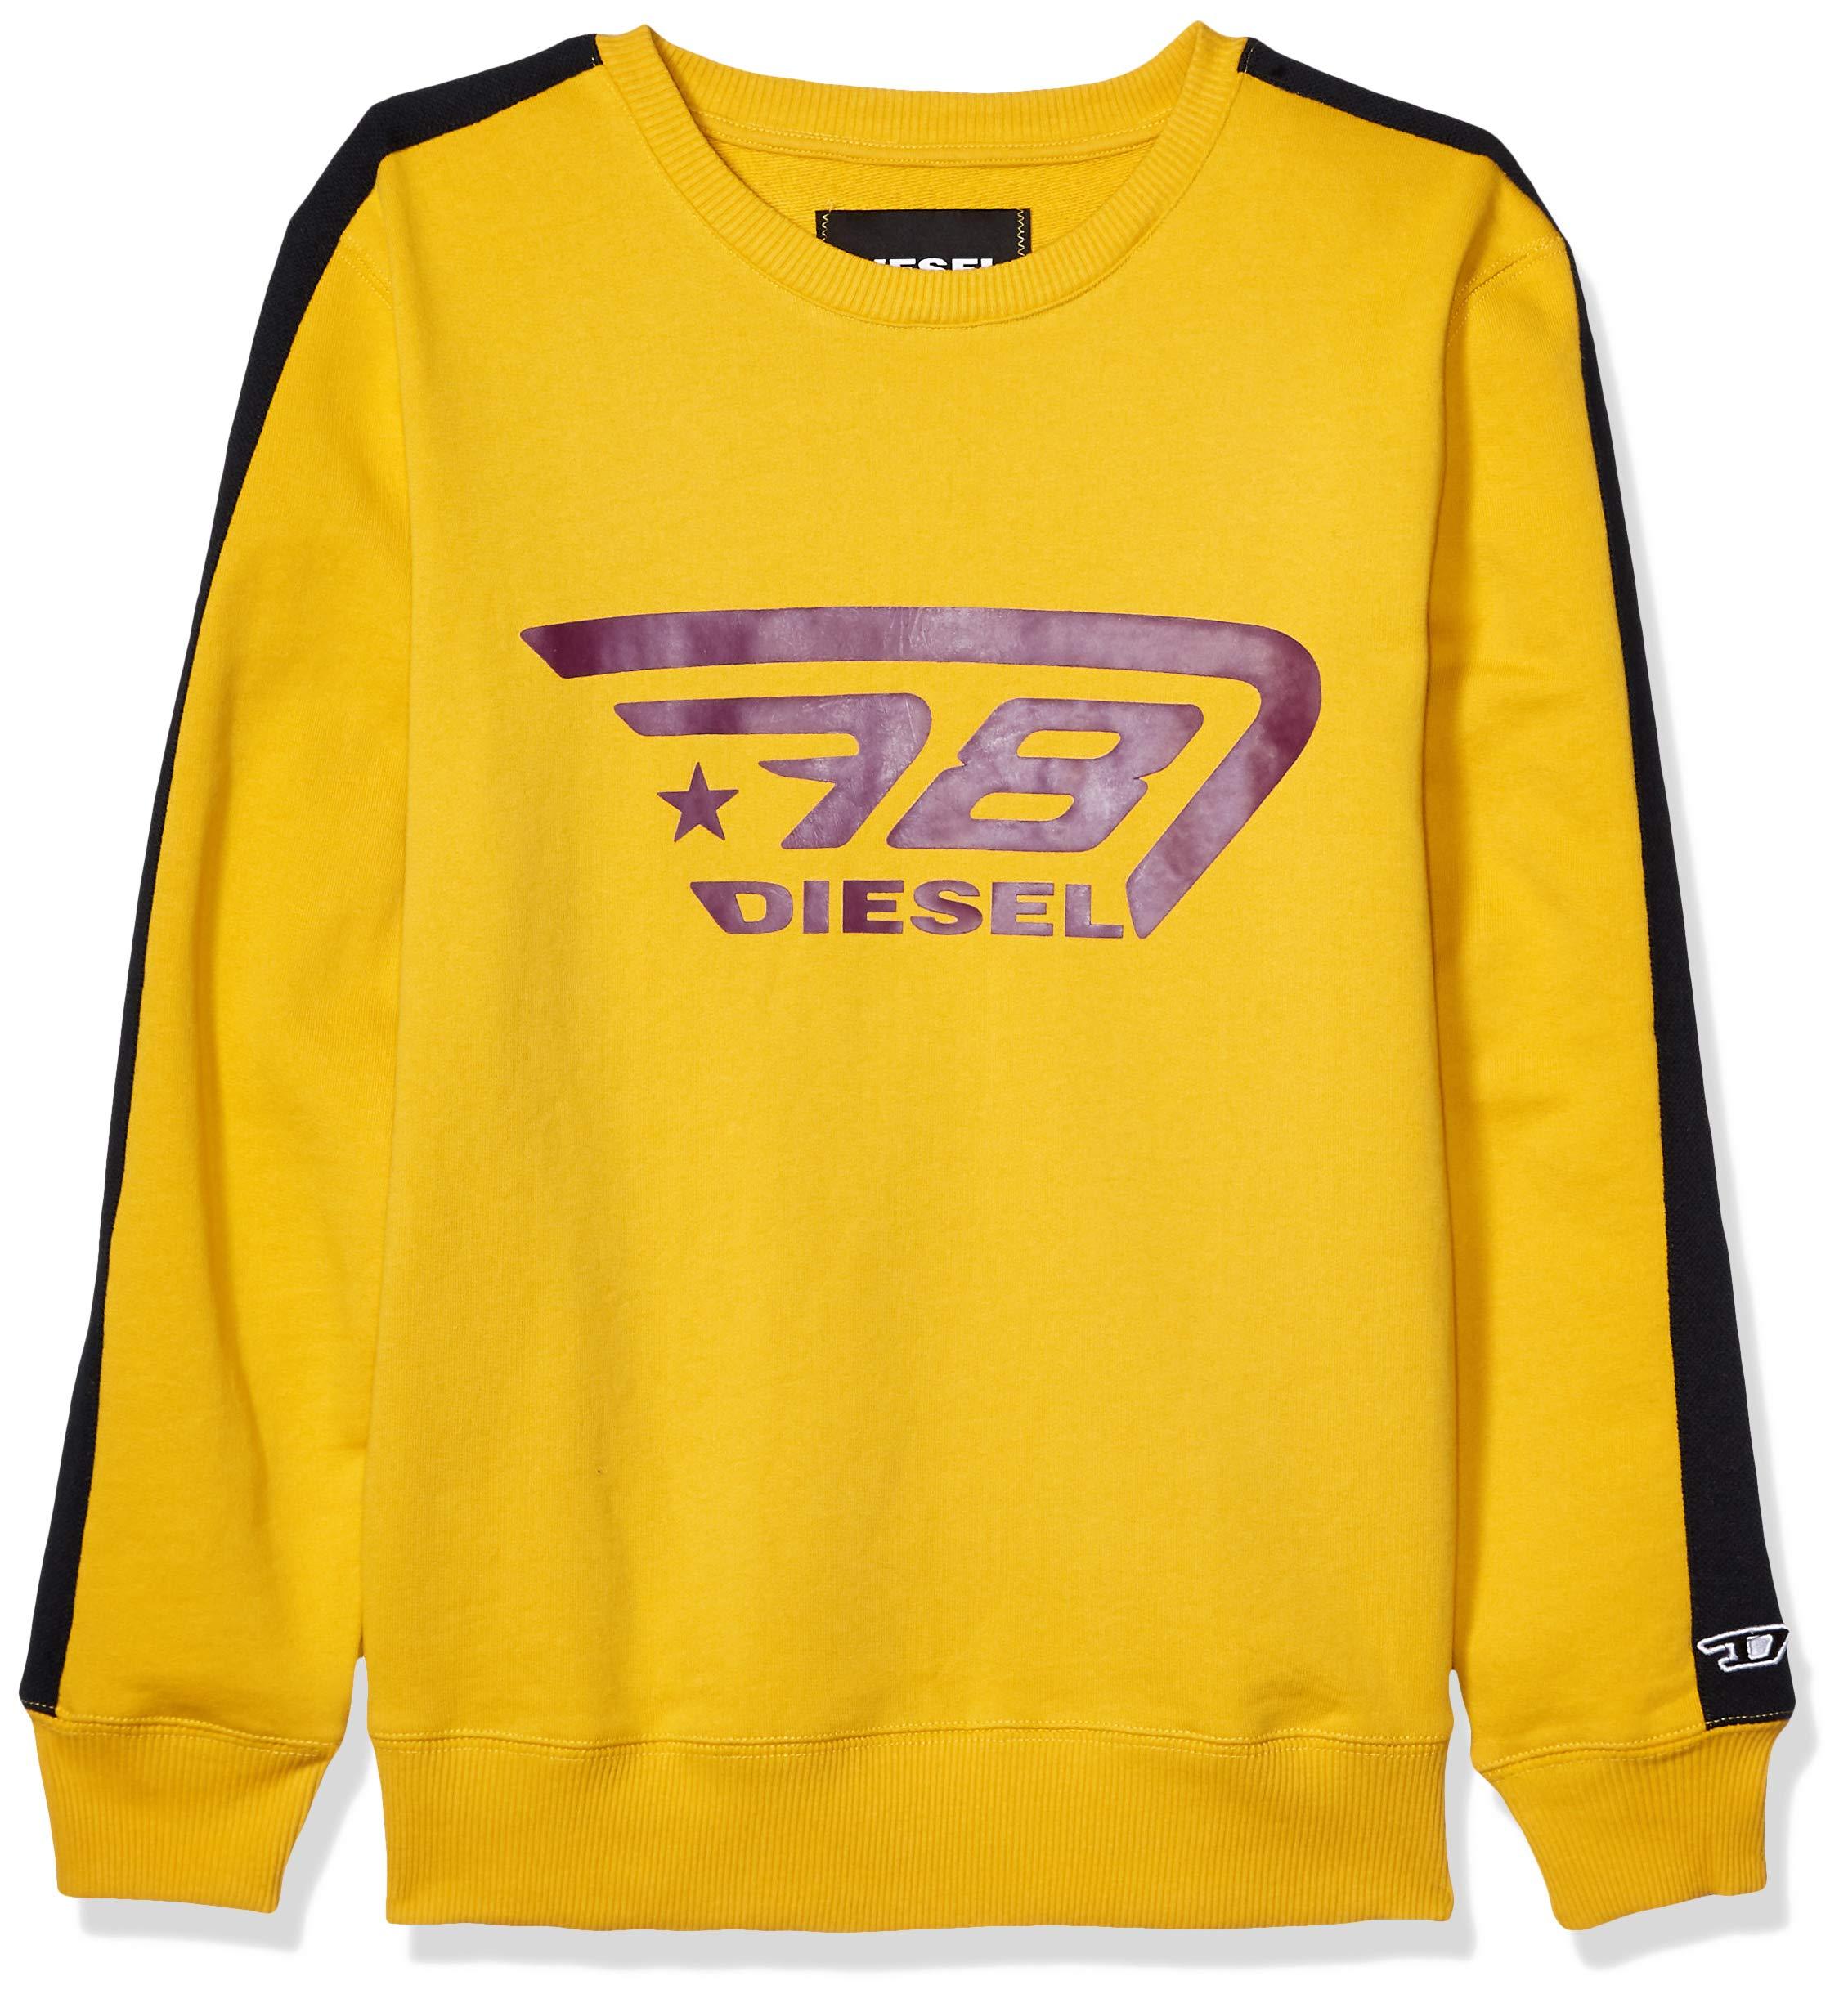 DIESEL Cotton Willy Sweat-shirt in Yellow for Men - Save 22% - Lyst